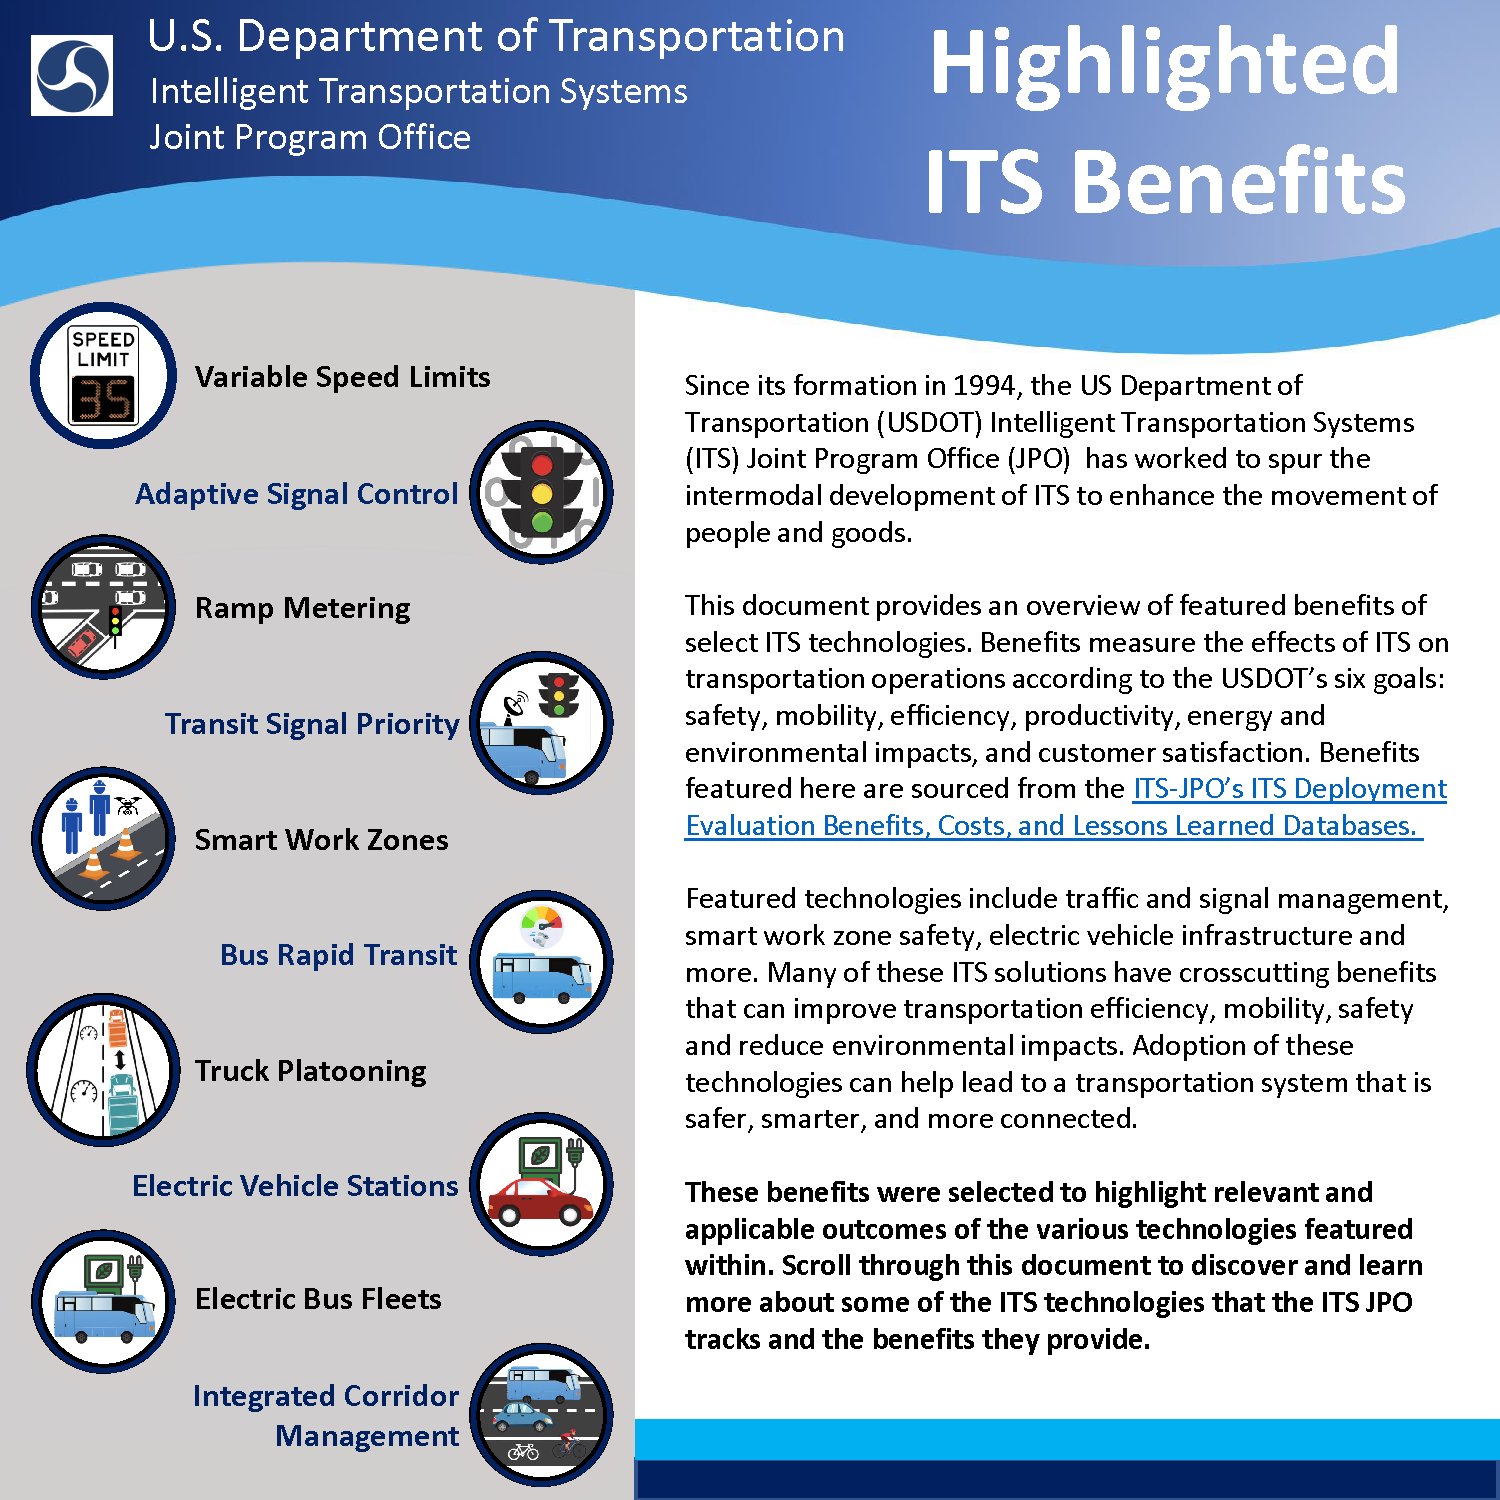 Highlighted ITS Benefits Infographic, with icons for Variable Speed Limits, Adaptive Signal Control, Ramp Metering, Transit Signal Priority, Smart Work Zones, Bus Rapid Transit, Truck Platooning, Electric Vehicle Stations, Electric Bus Fleets, and Integrated Corridor Management 